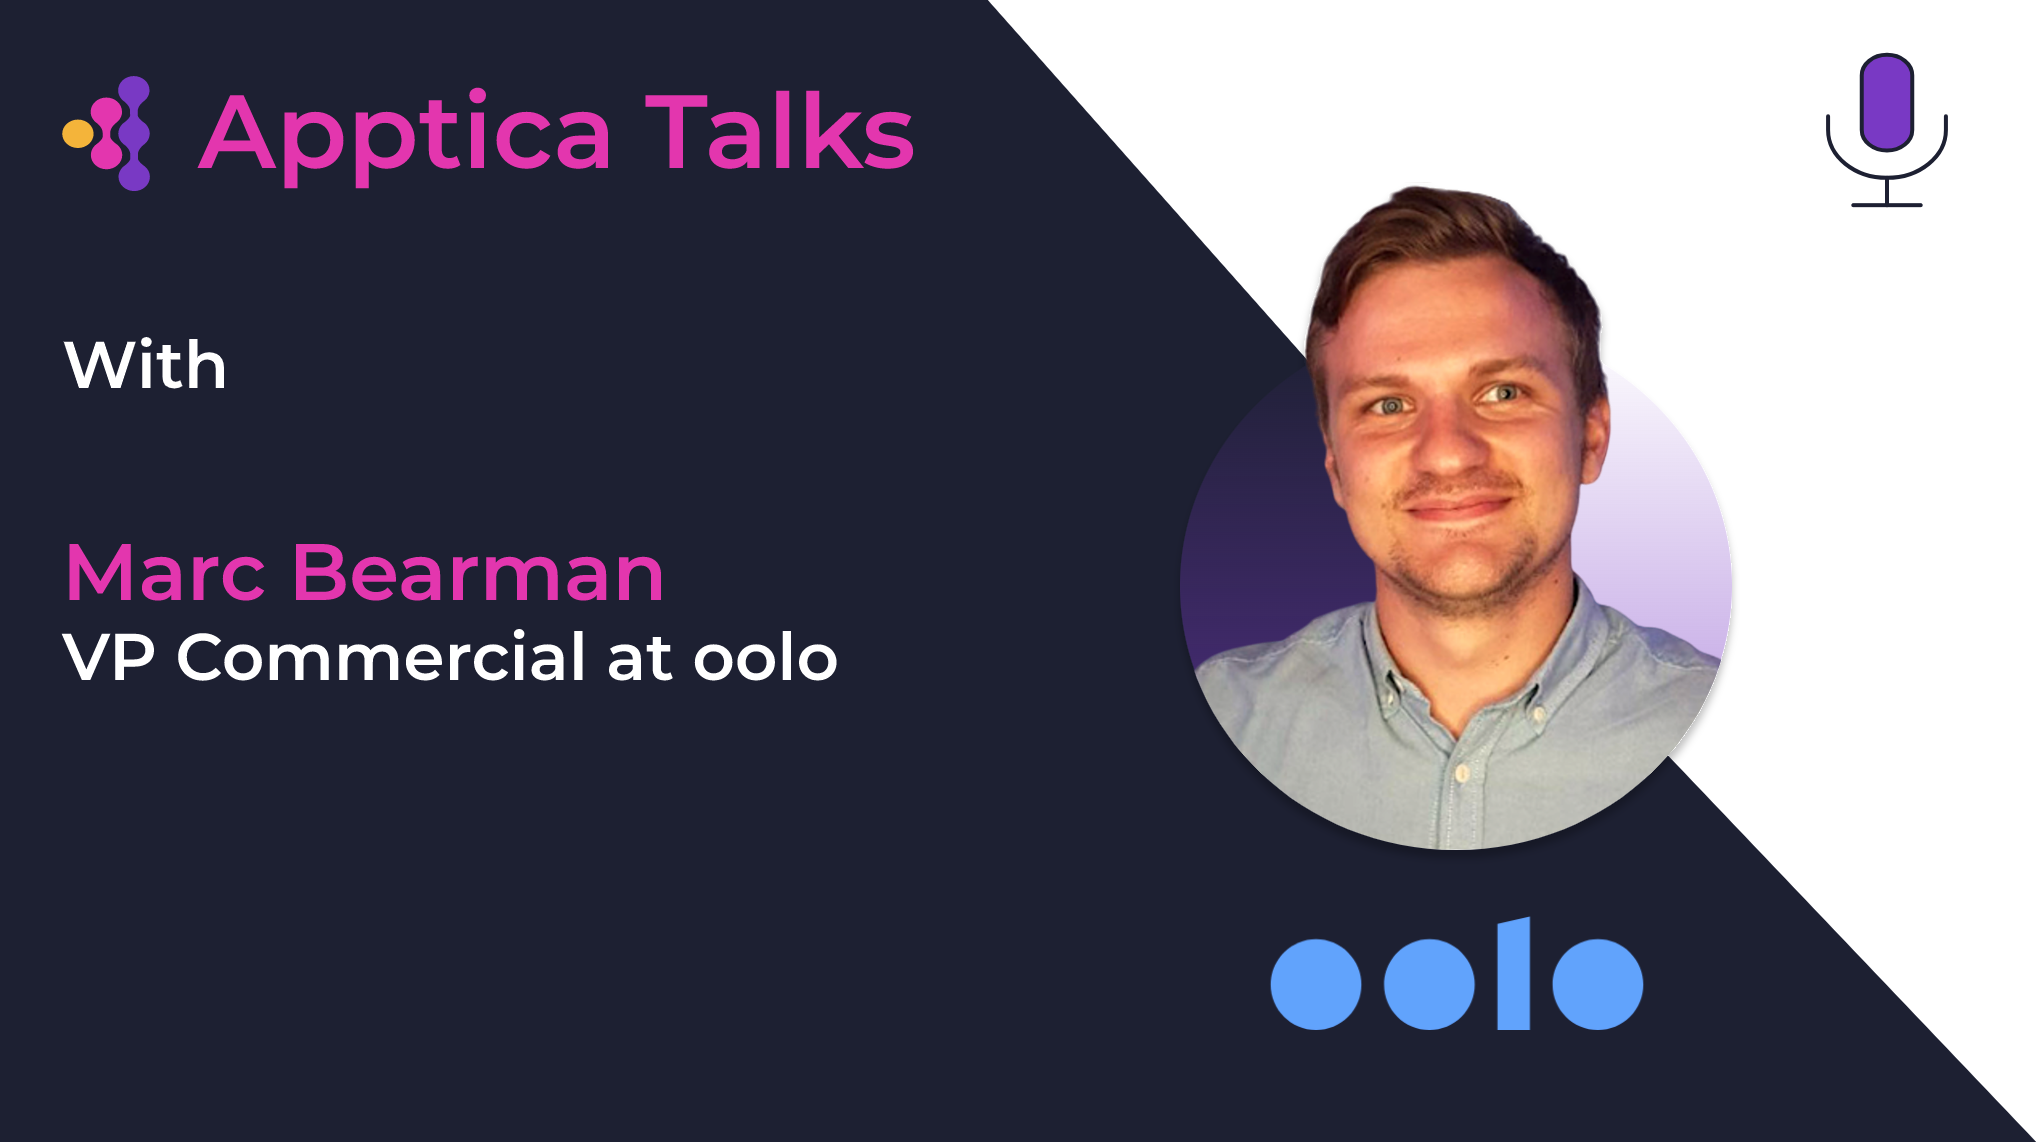 Apptica Talks. Episode #3. Combined trends in UA and Monetization with Marc Bearman, from oolo.